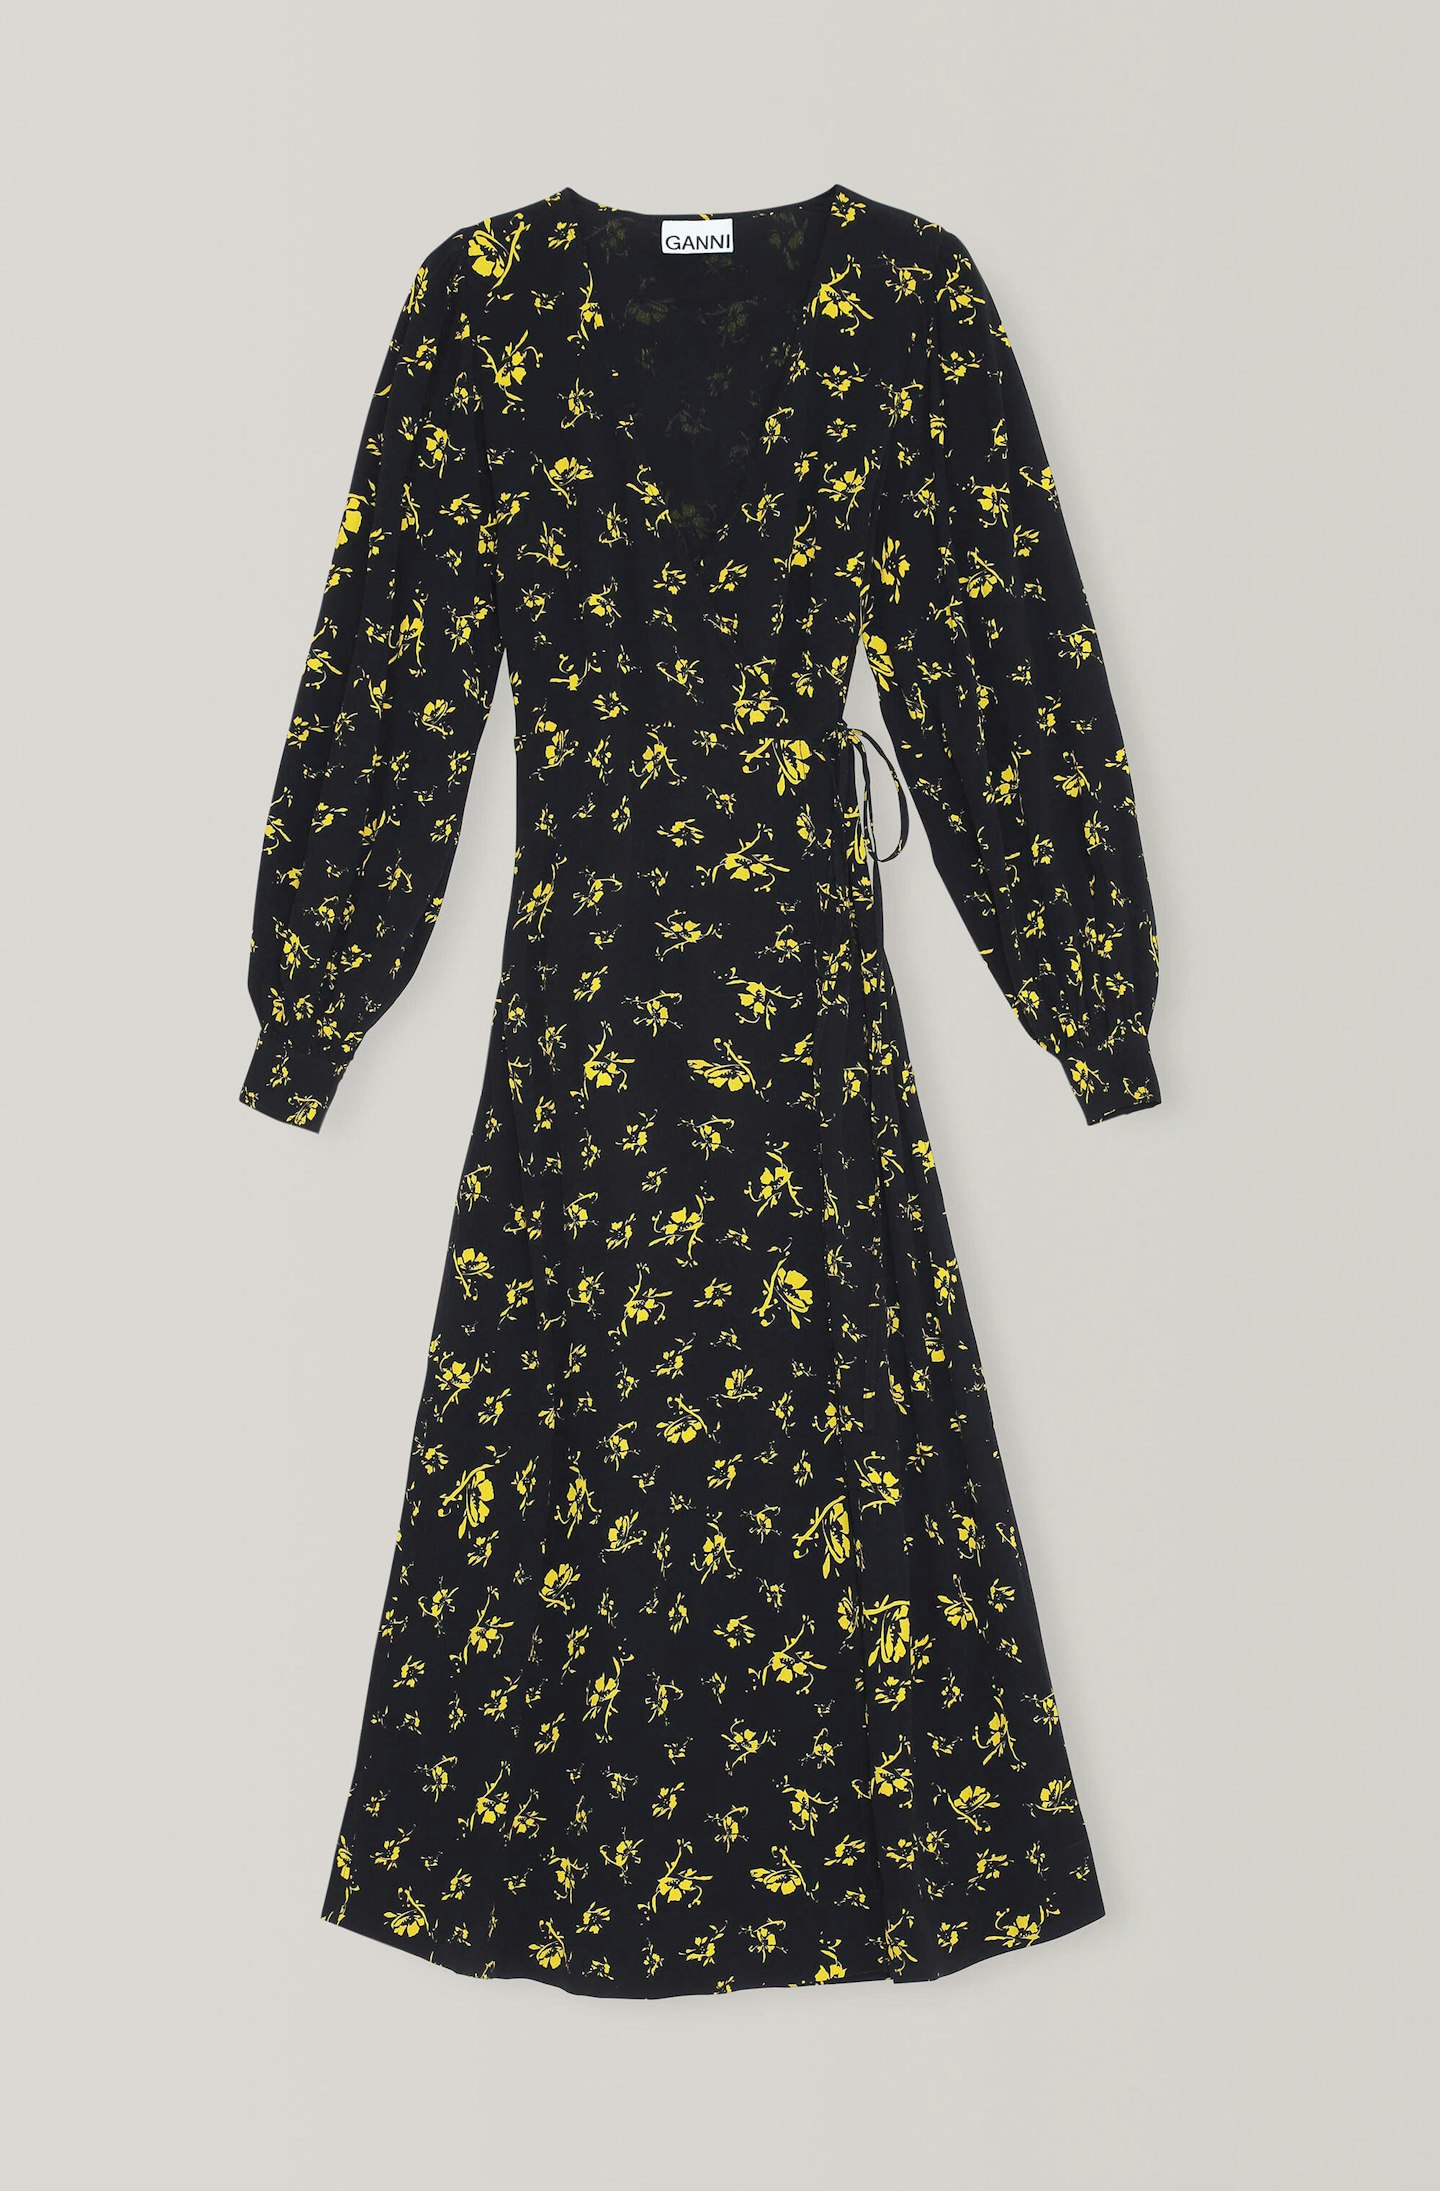 Ganni, Printed Crepe Wrap Dress, Was £200, Now £100